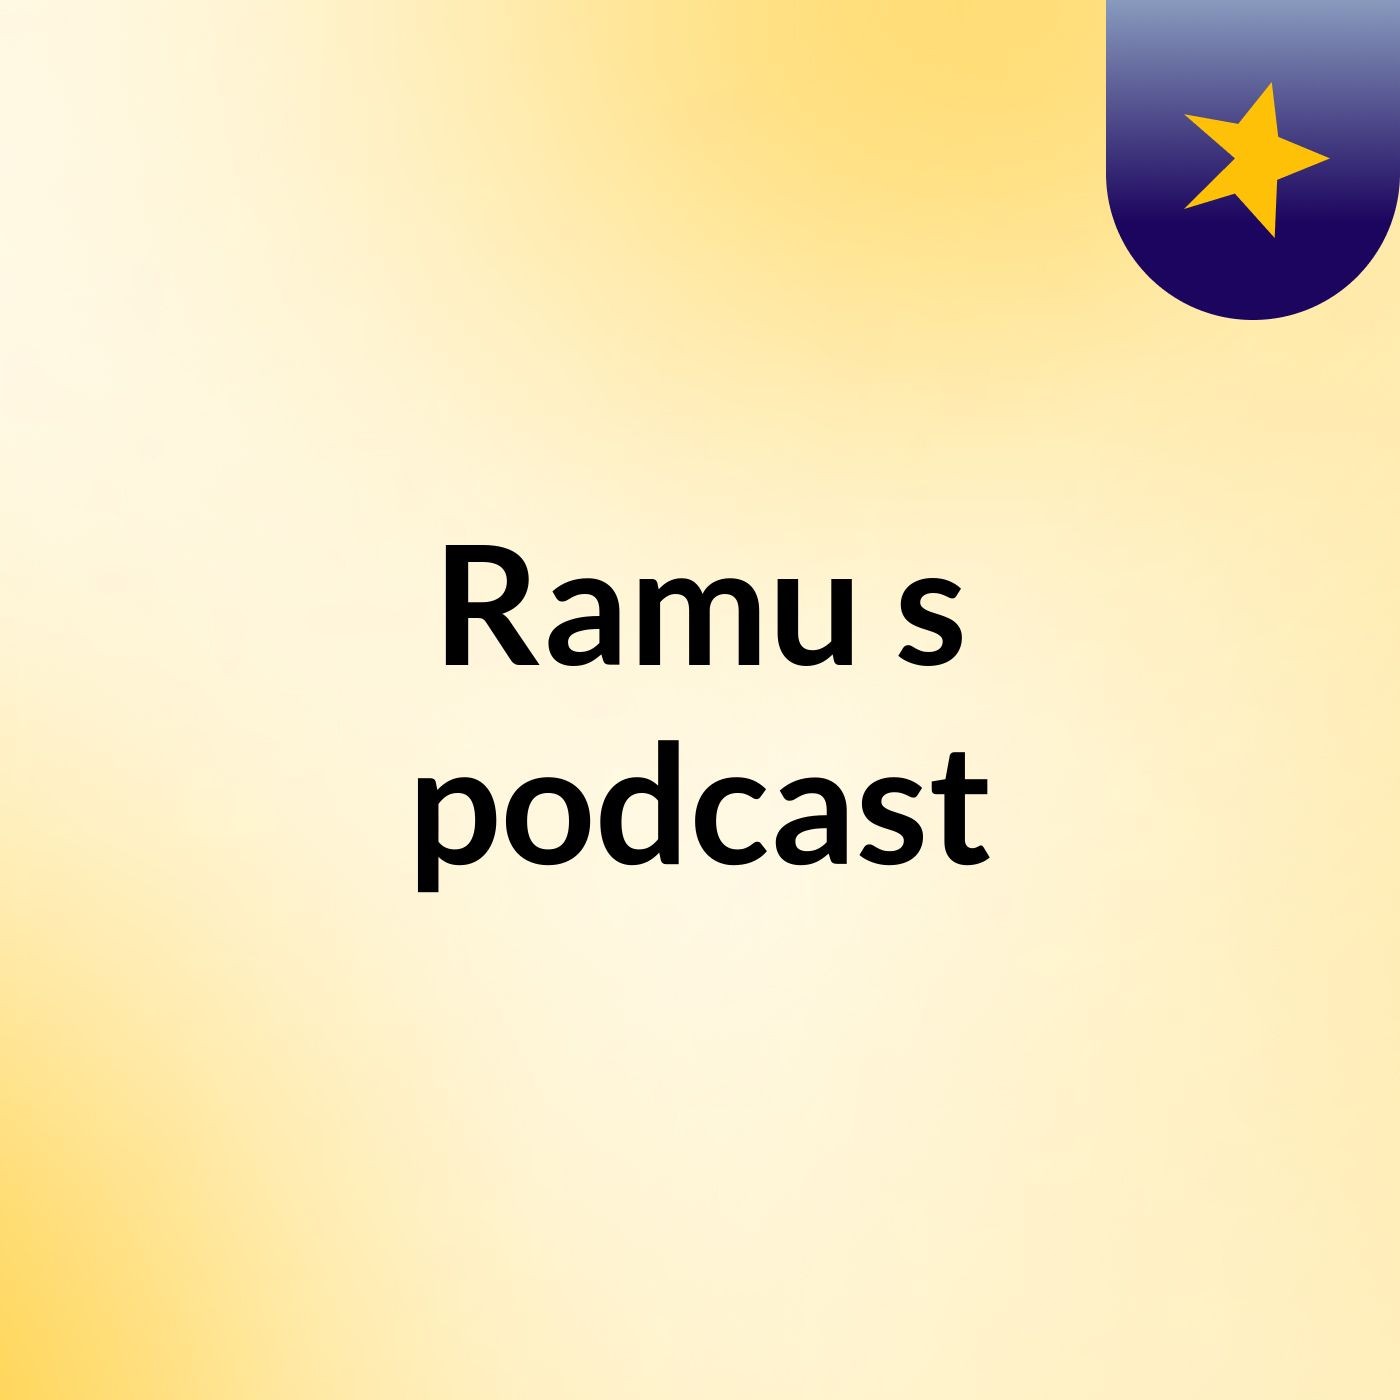 Introduction To 2nd Year Class - Ramu's podcast